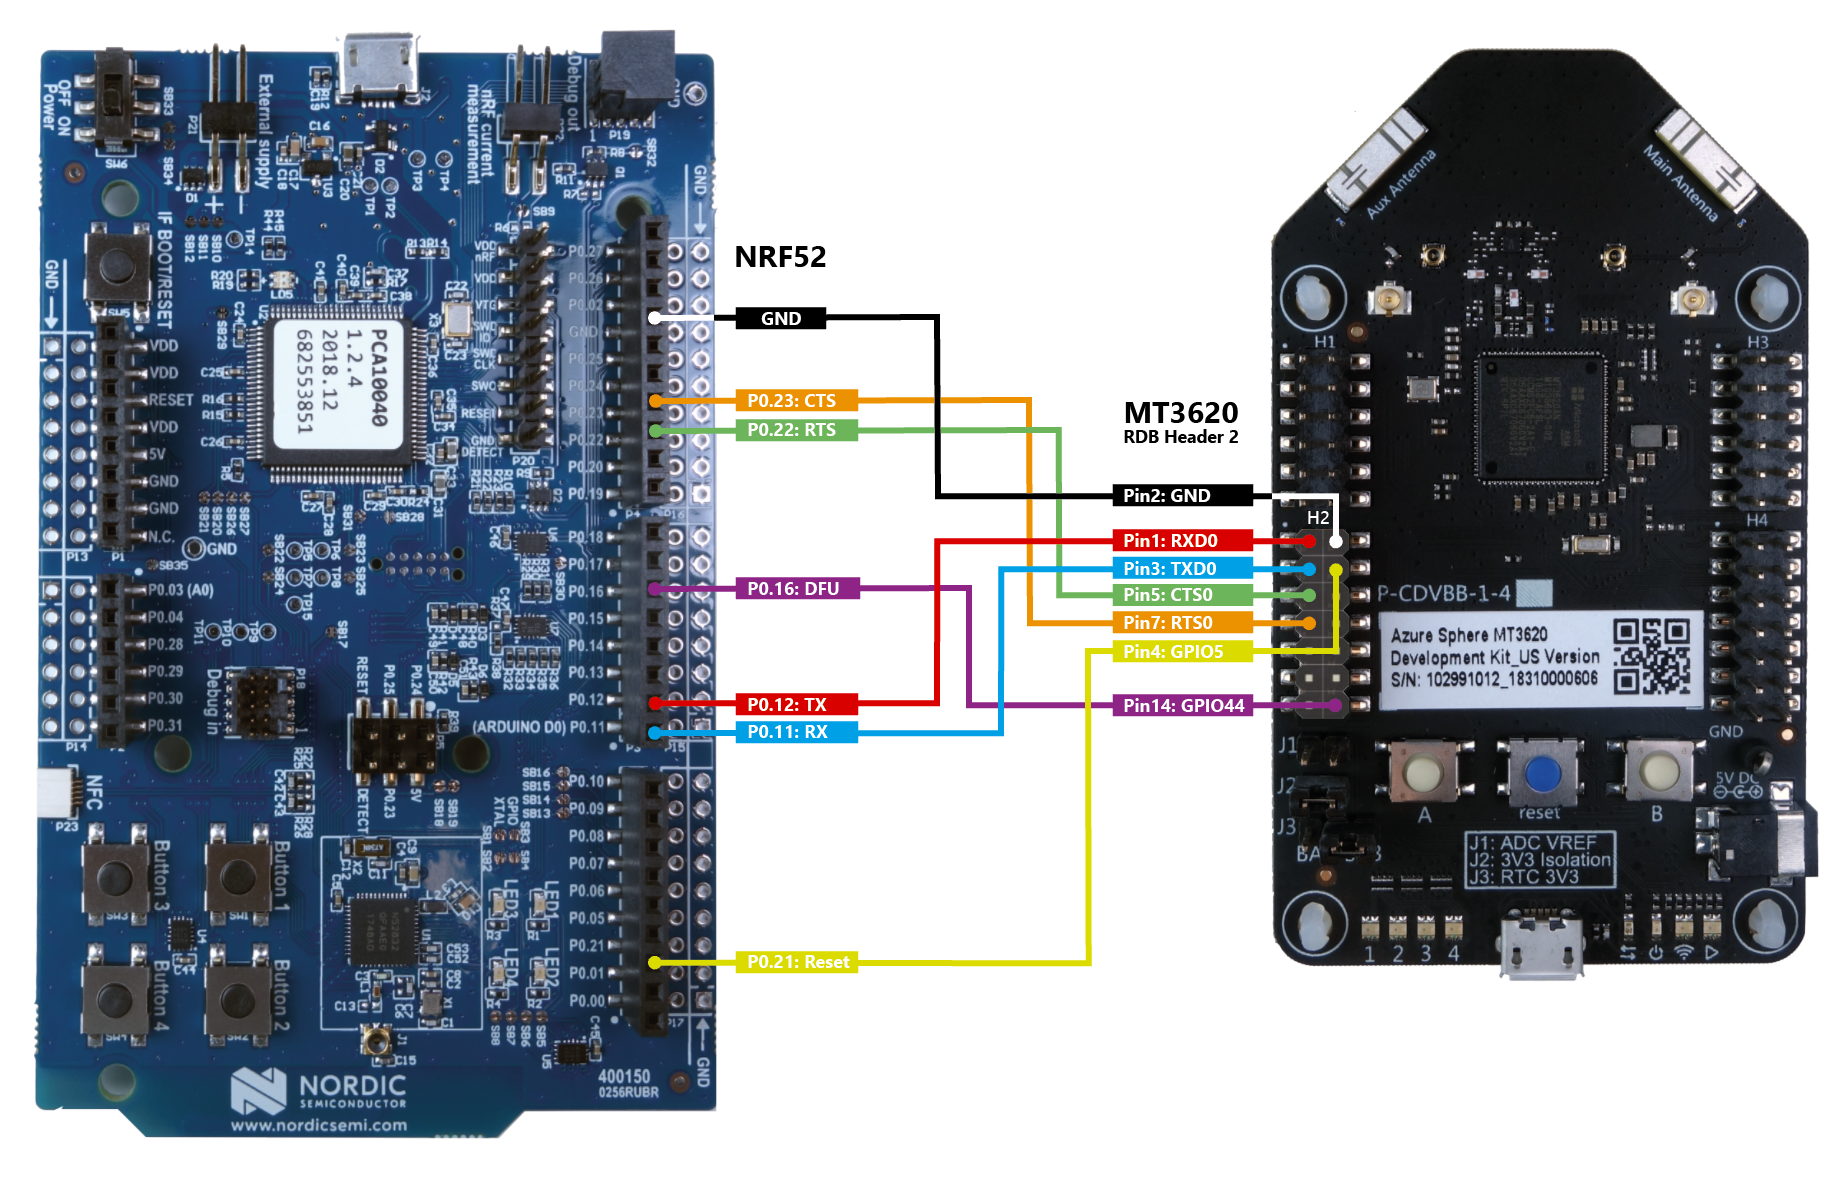 Connection diagram for nRF52 and MT3620